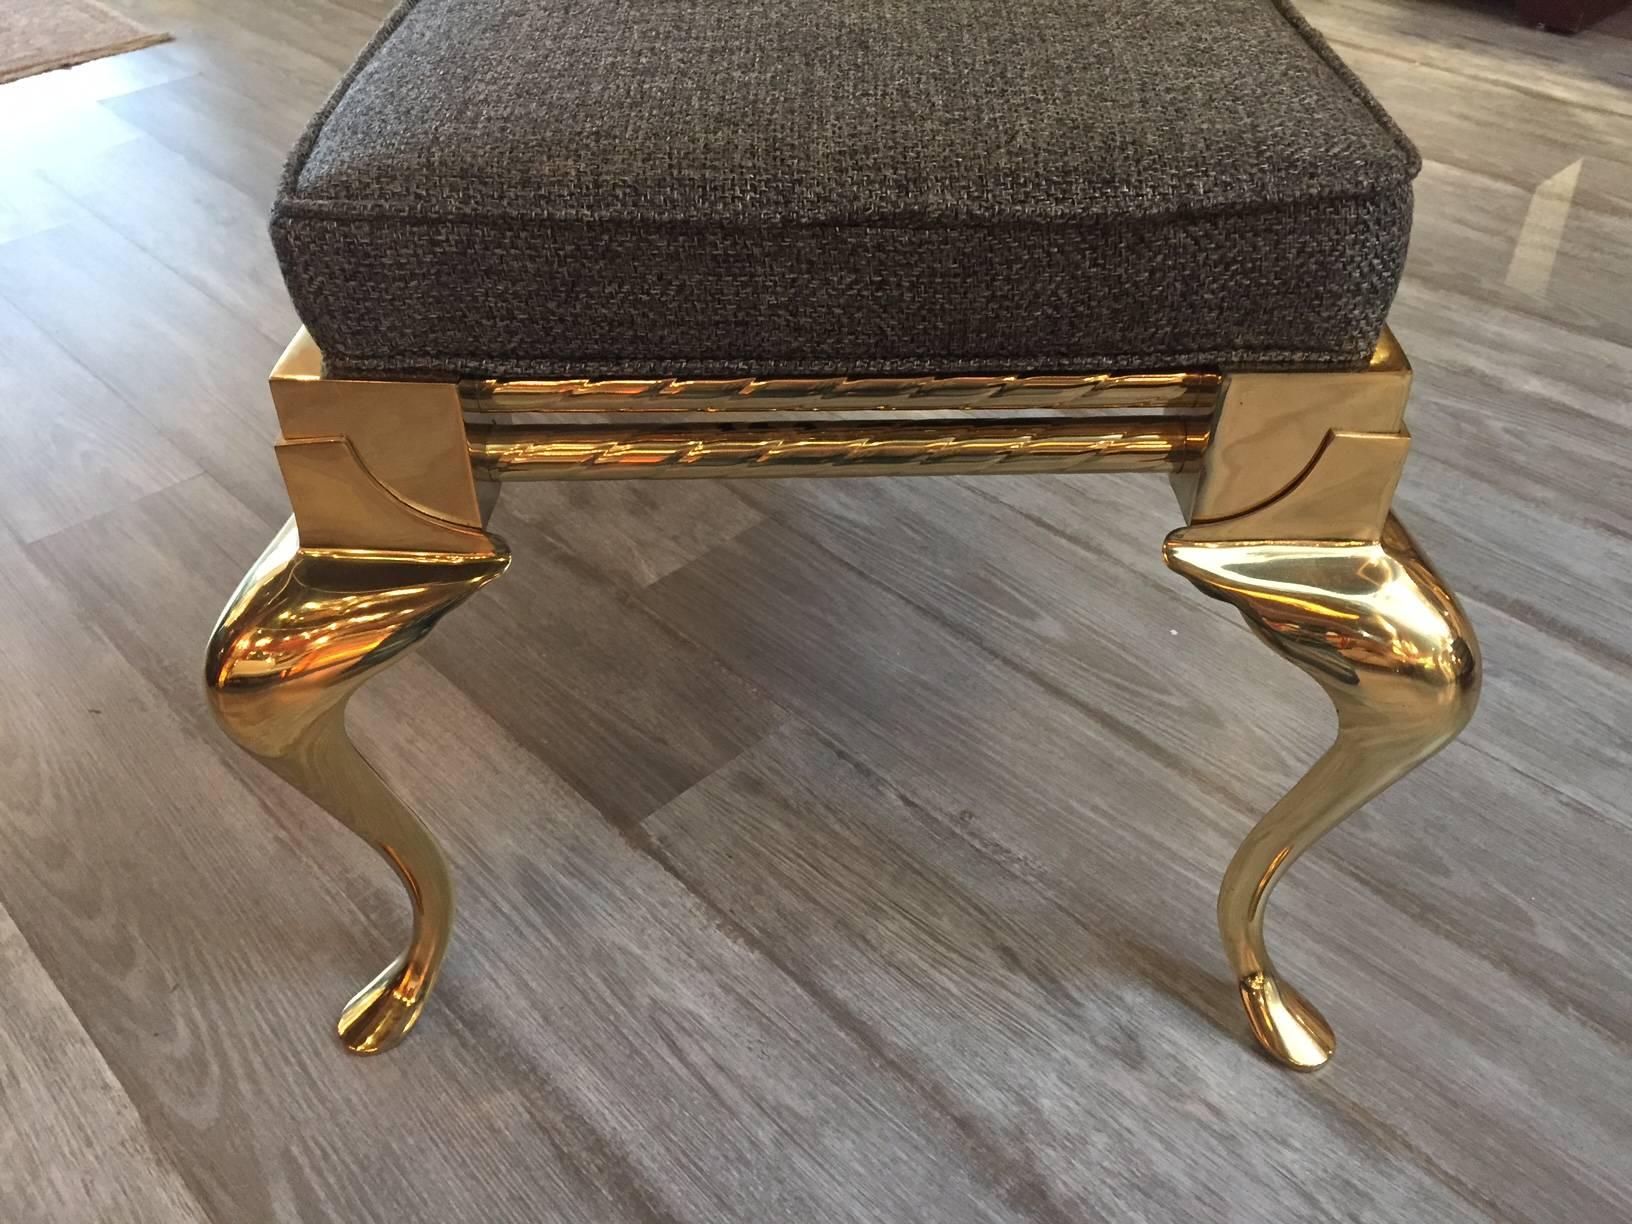 Glamorous rectangular bench having a solid brass base with stylish cabriole legs, newly upholstered in a refined grey menswear fabric.